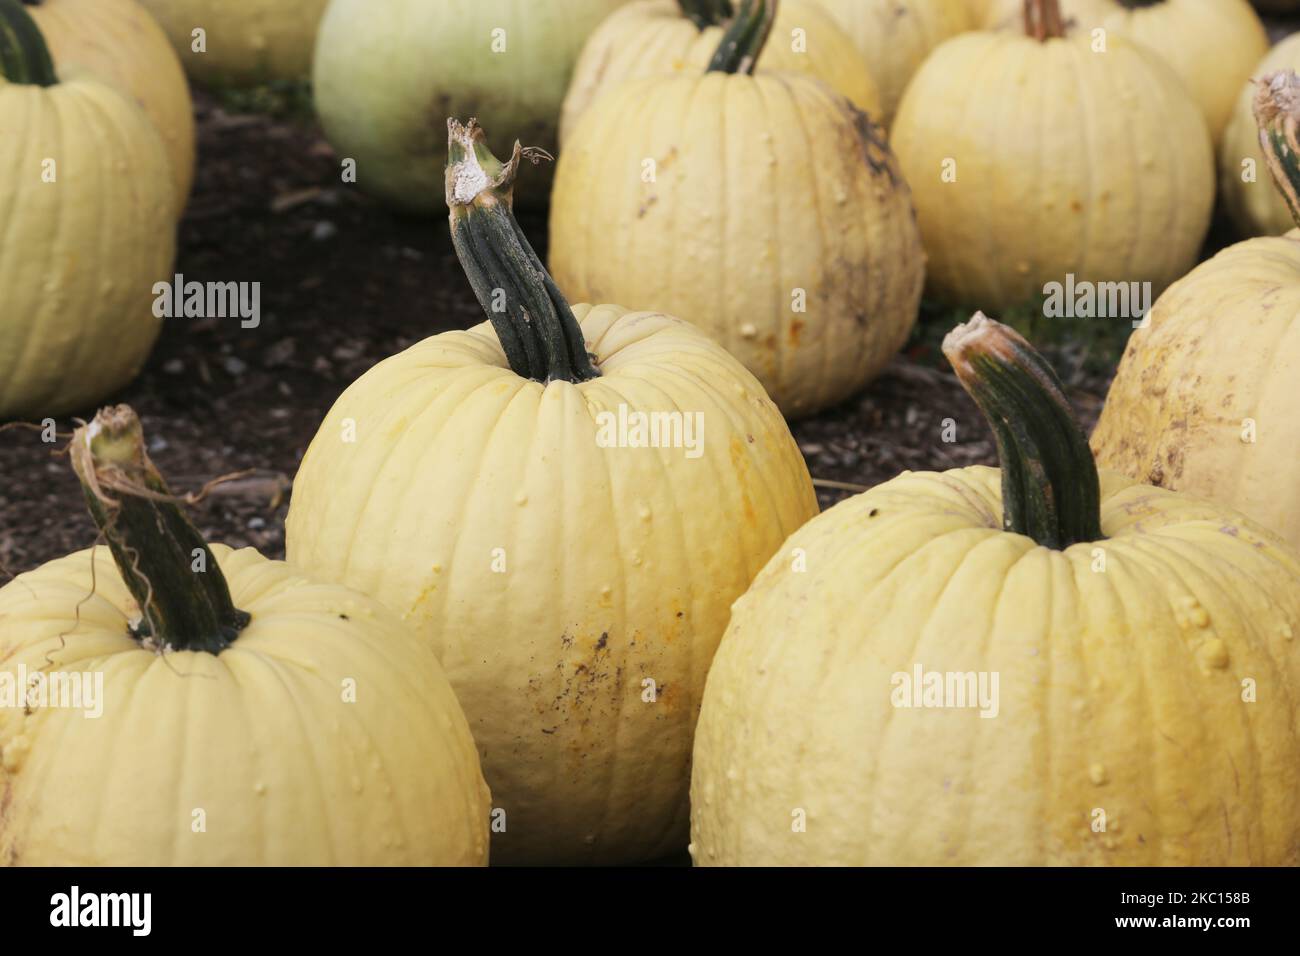 Yellow-white pumpkins at a farm during the novel coronavirus (COVID-19) pandemic in Markham, Ontario, Canada, on October 03, 2020. Cases of COVID-19 continue to rise, with record daily numbers across the Greater Toronto Area. Calls to place the city of Toronto back into lockdown to slow the spread of the virus are mounting from healthcare officials. (Photo by Creative Touch Imaging Ltd./NurPhoto) Stock Photo